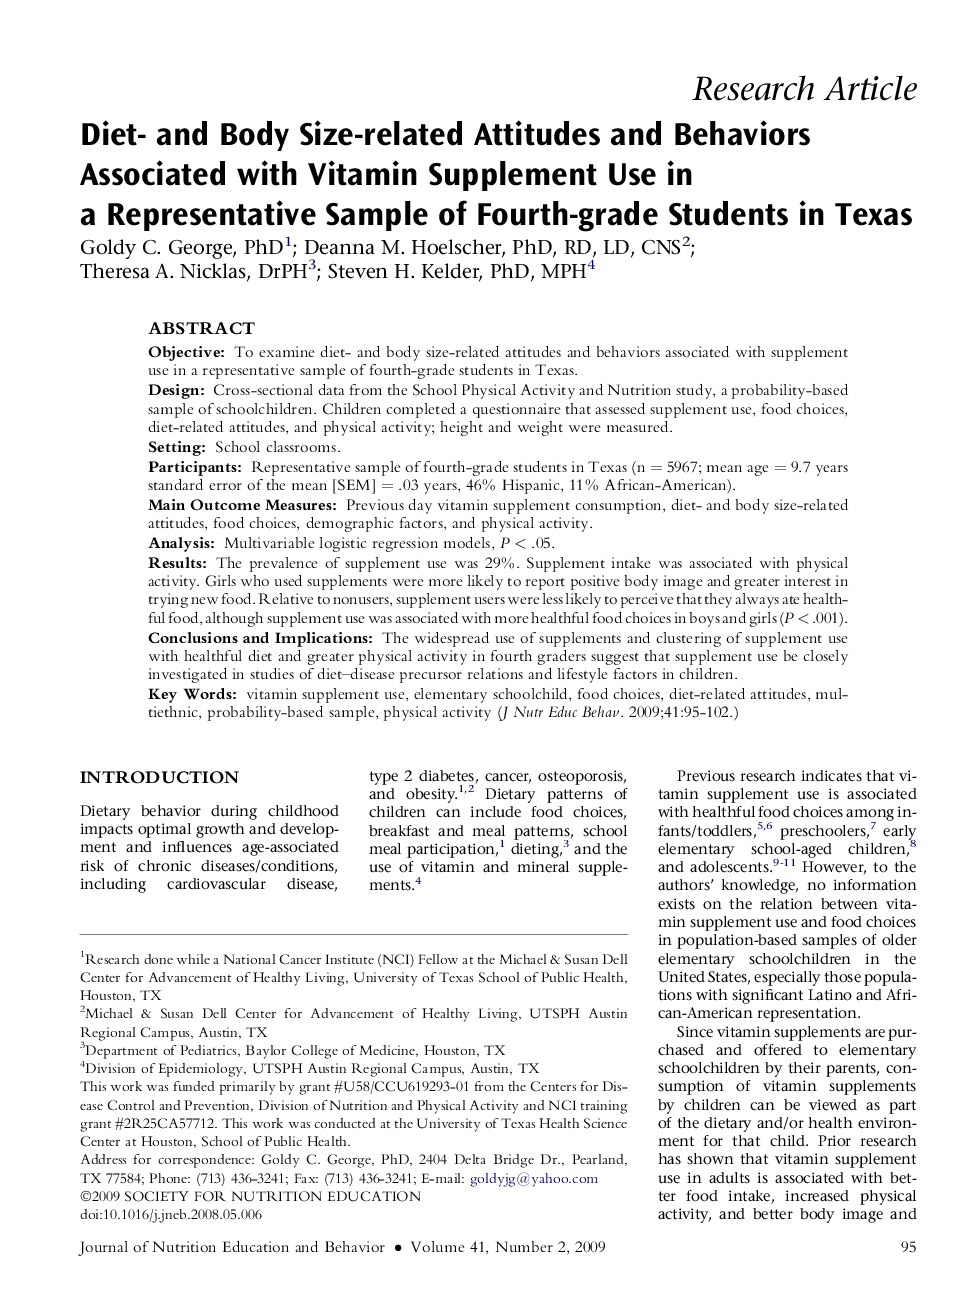 Diet- and Body Size-related Attitudes and Behaviors Associated with Vitamin Supplement Use in a Representative Sample of Fourth-grade Students in Texas 